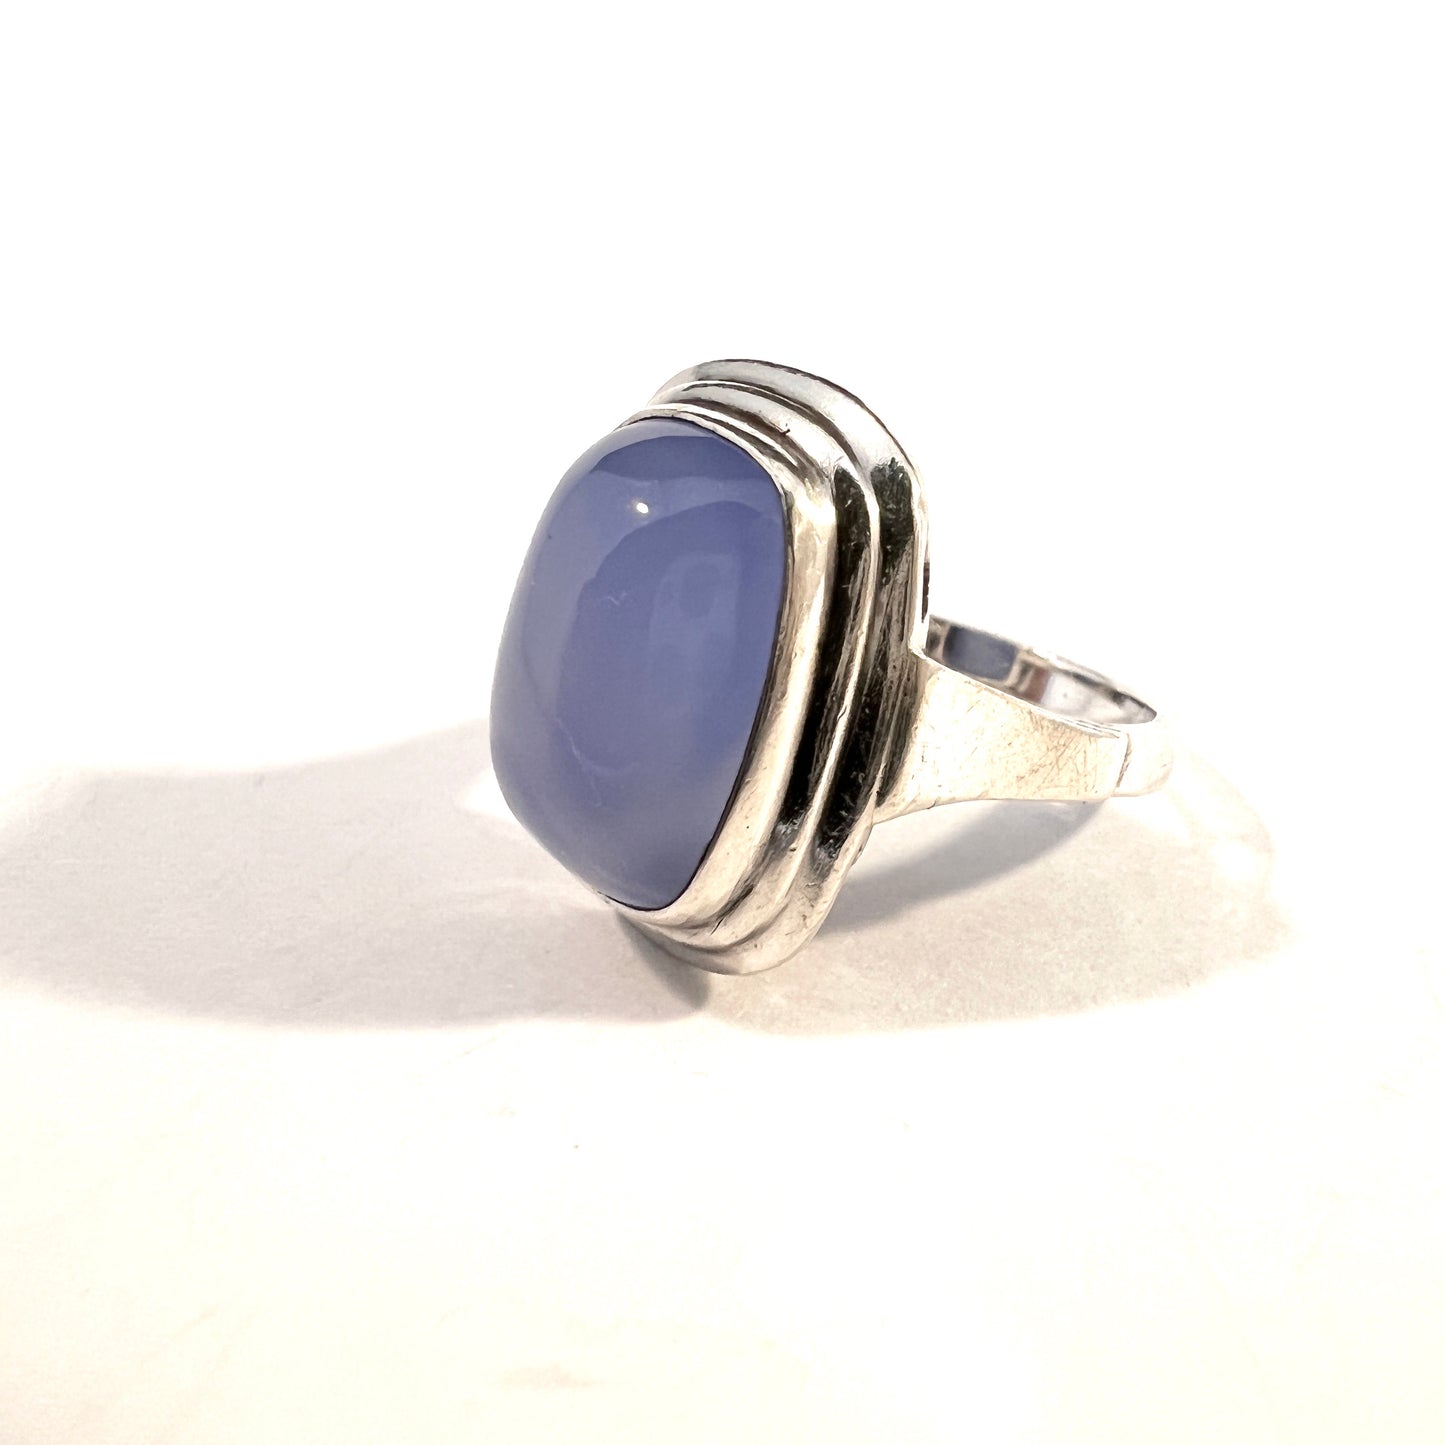 Germany / Austria 1950s. Vintage 835 Silver Chalcedony Ring.